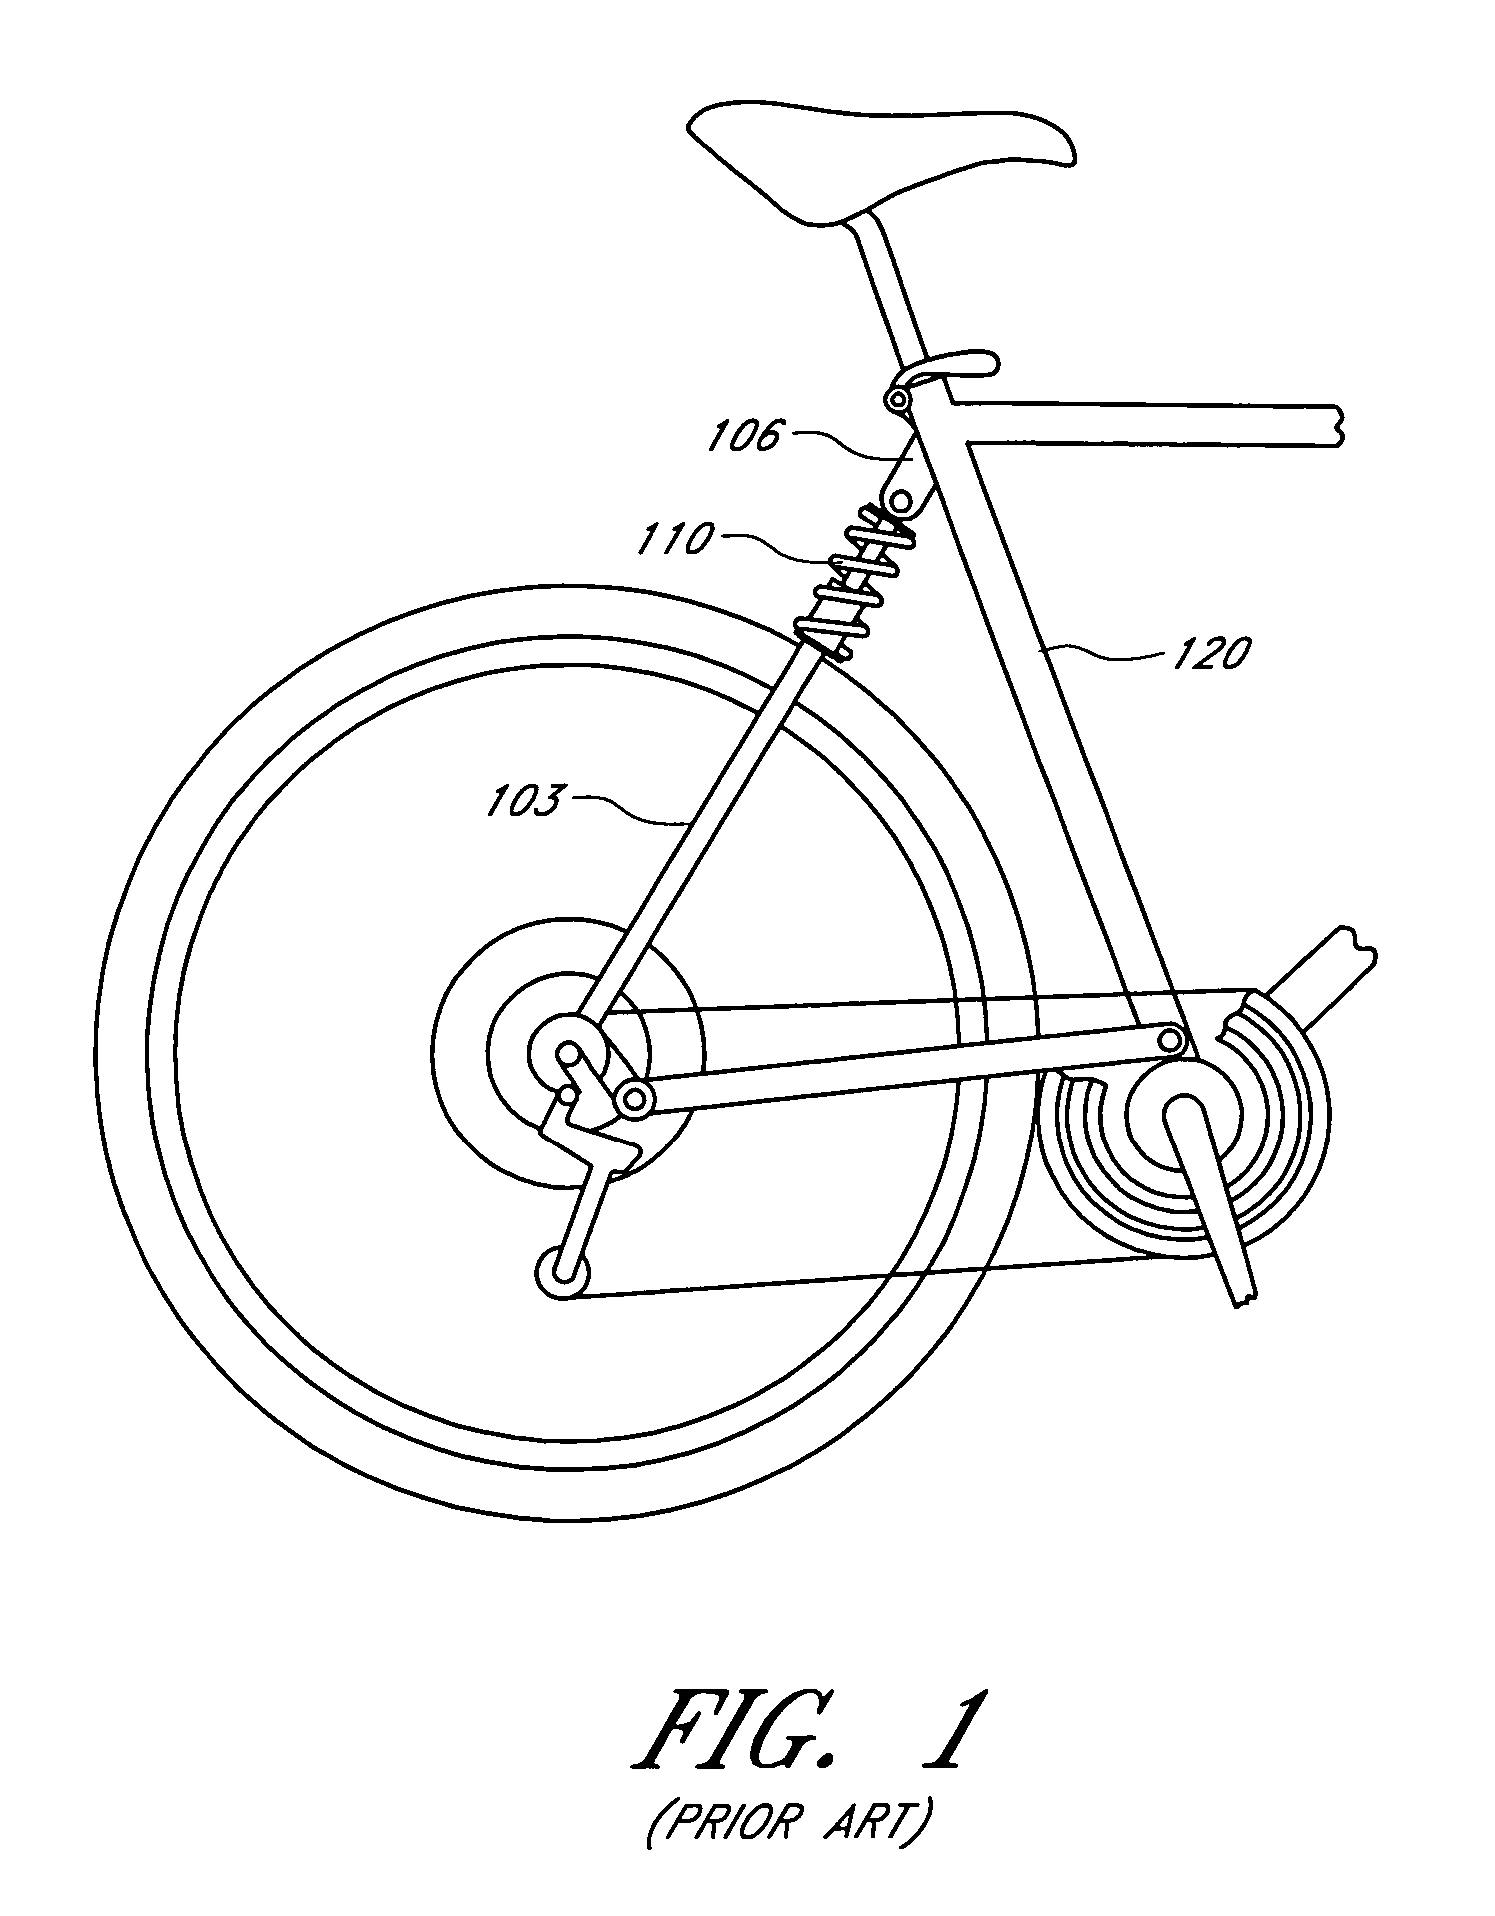 Bicycle damping enhancement system